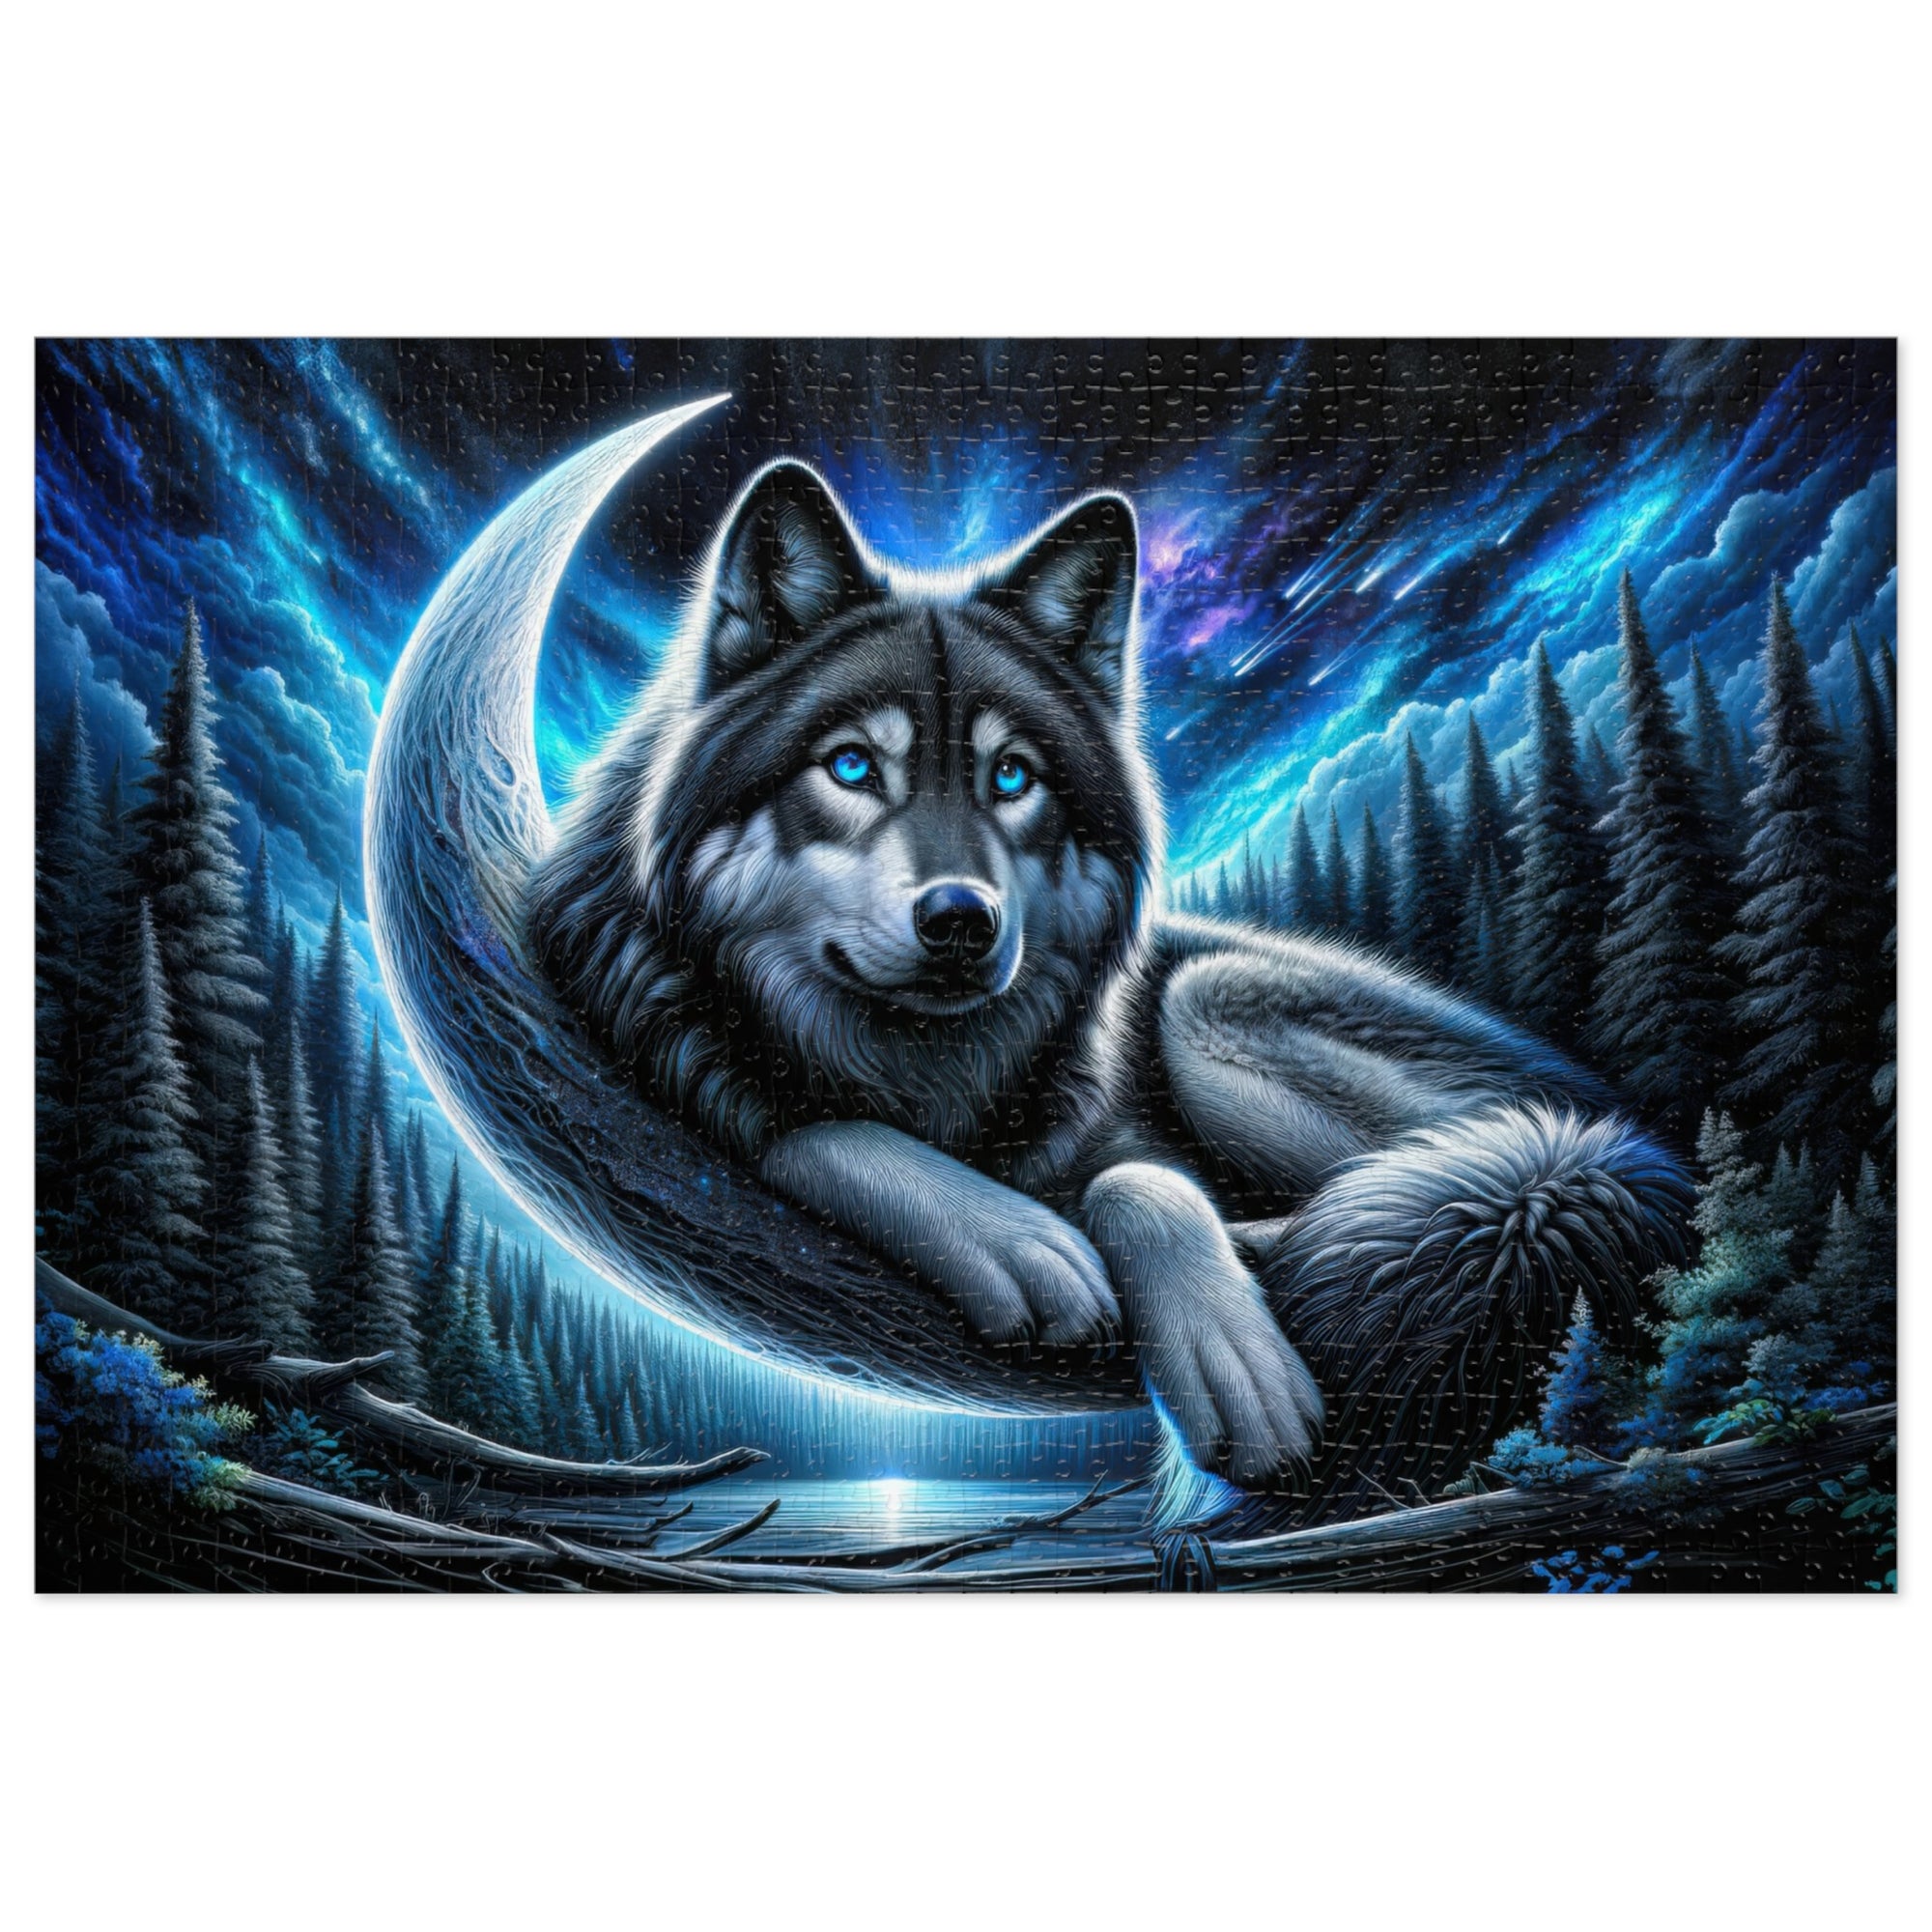 The Wolf's Cosmic Watch Puzzle